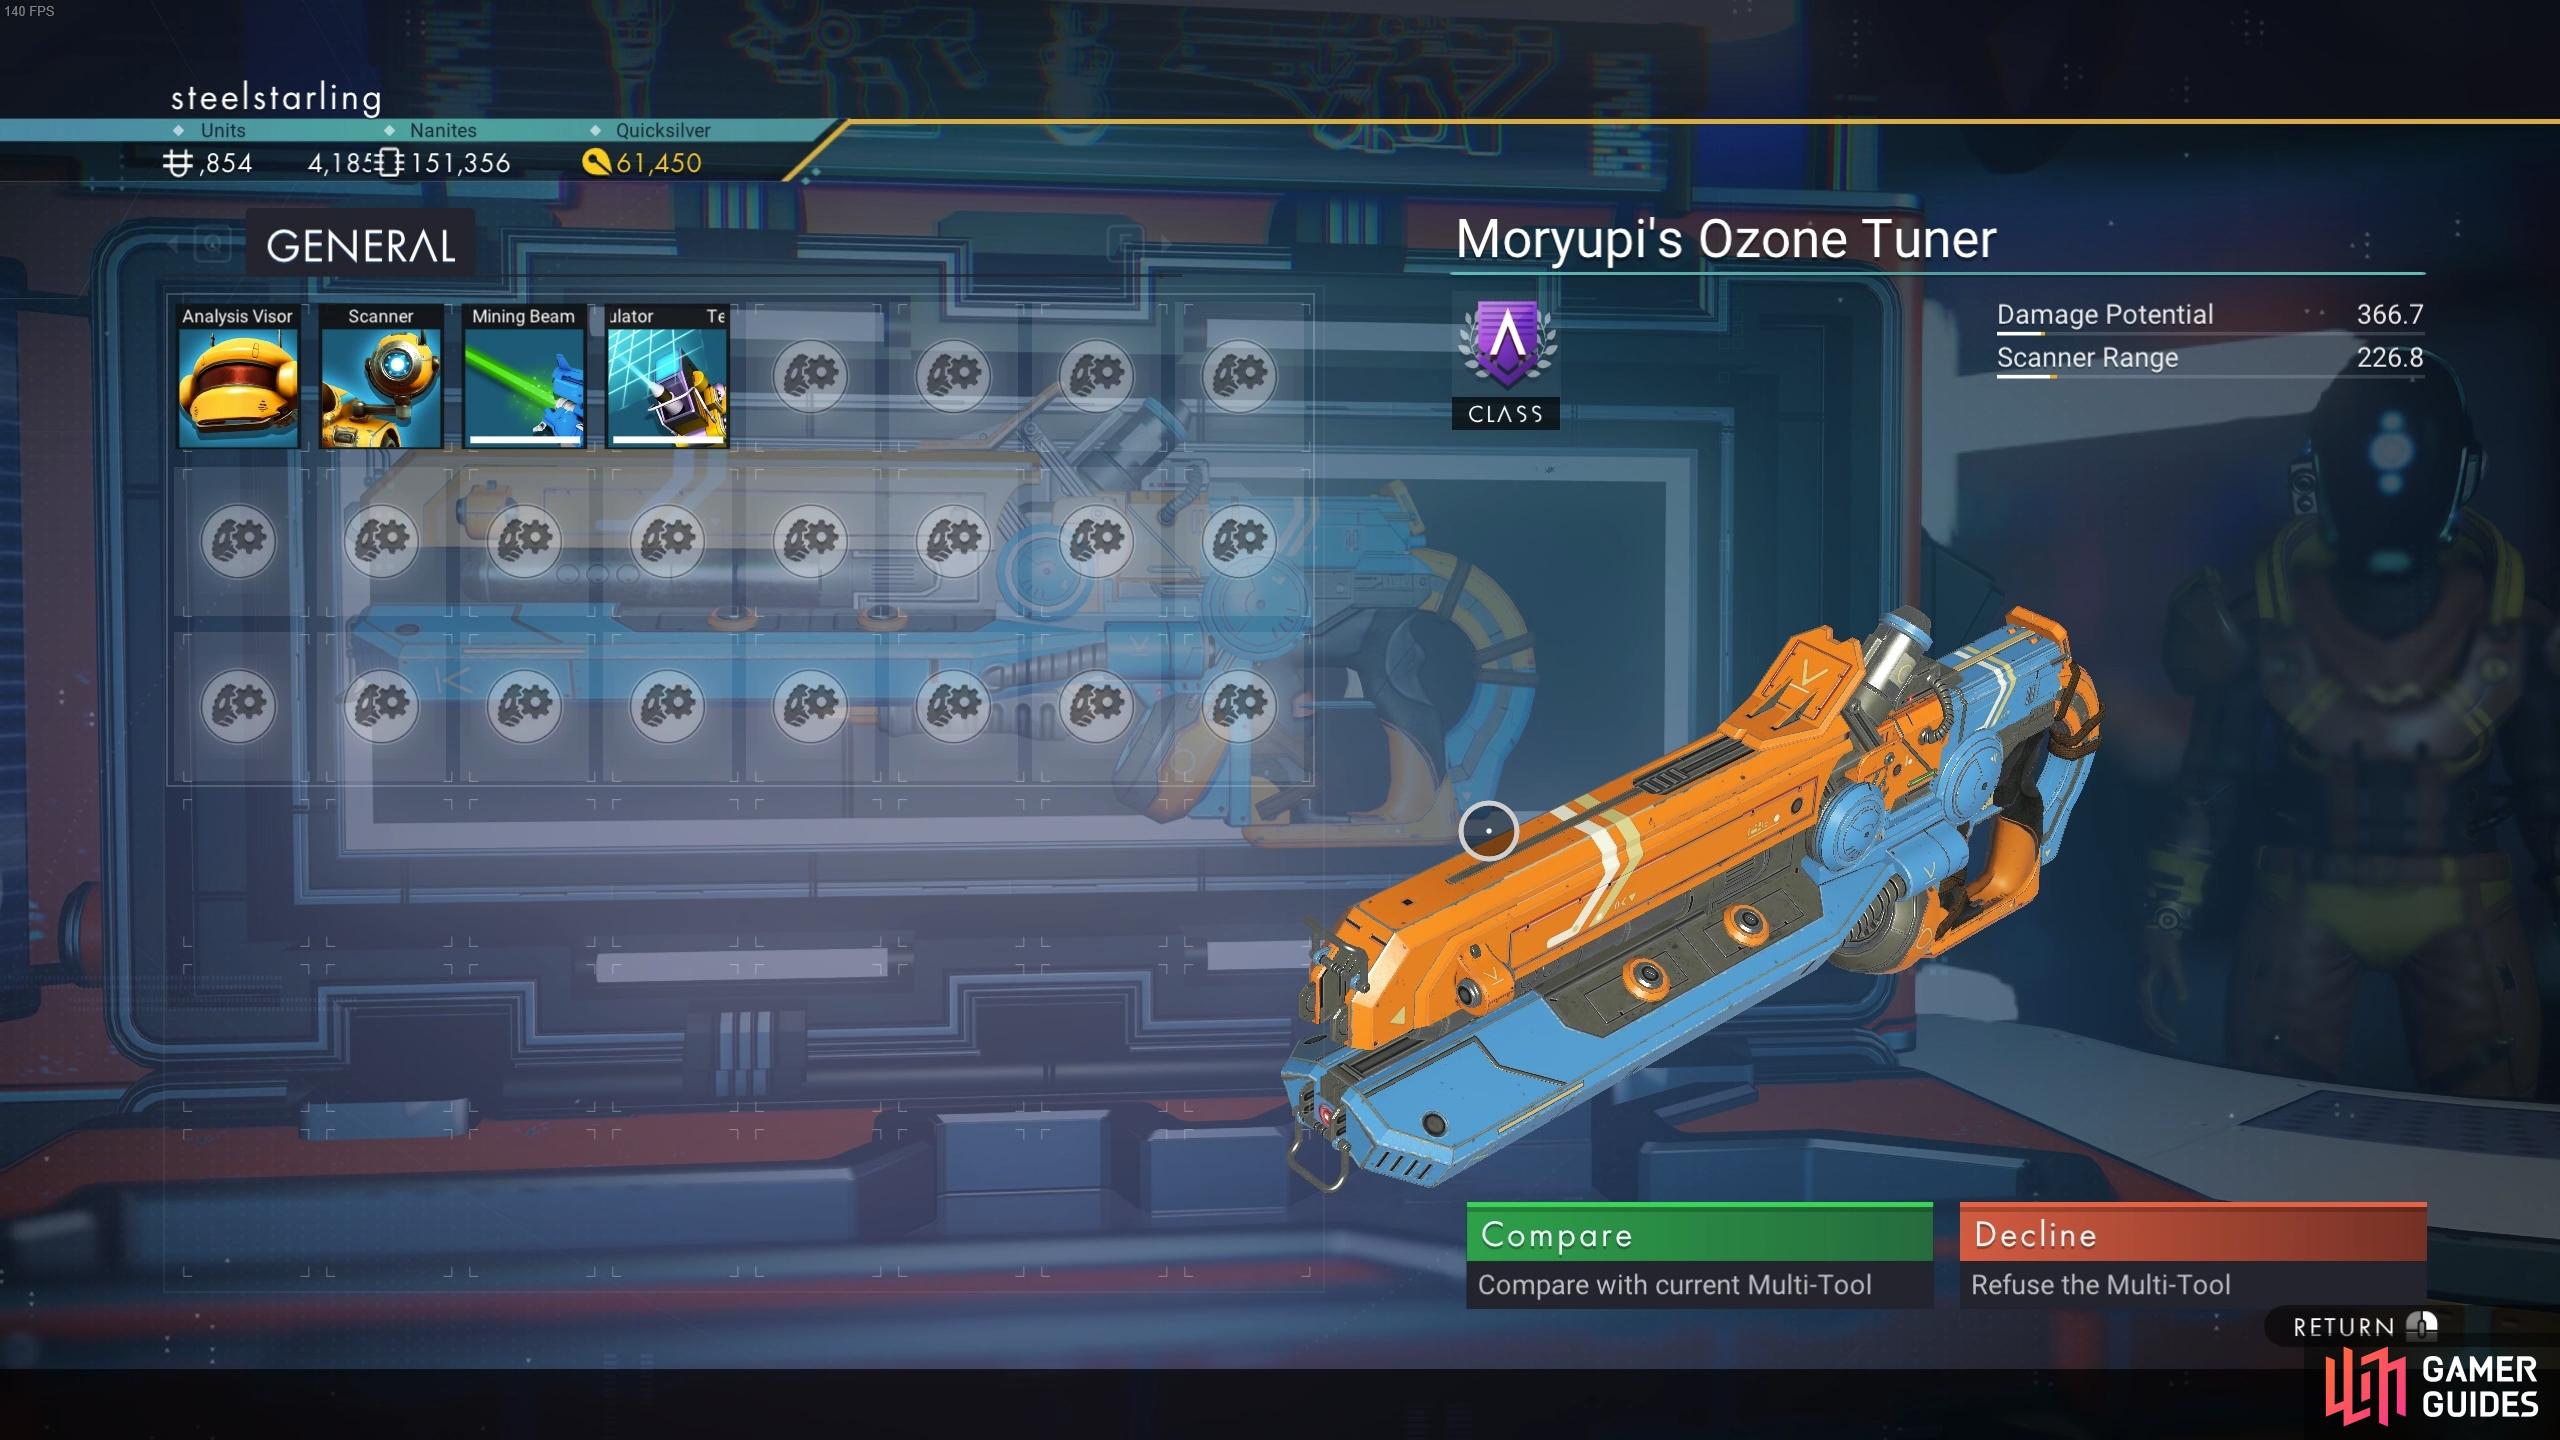 You'll find new Multi-Tools to purchase to the left of each new merchant that you encounter.